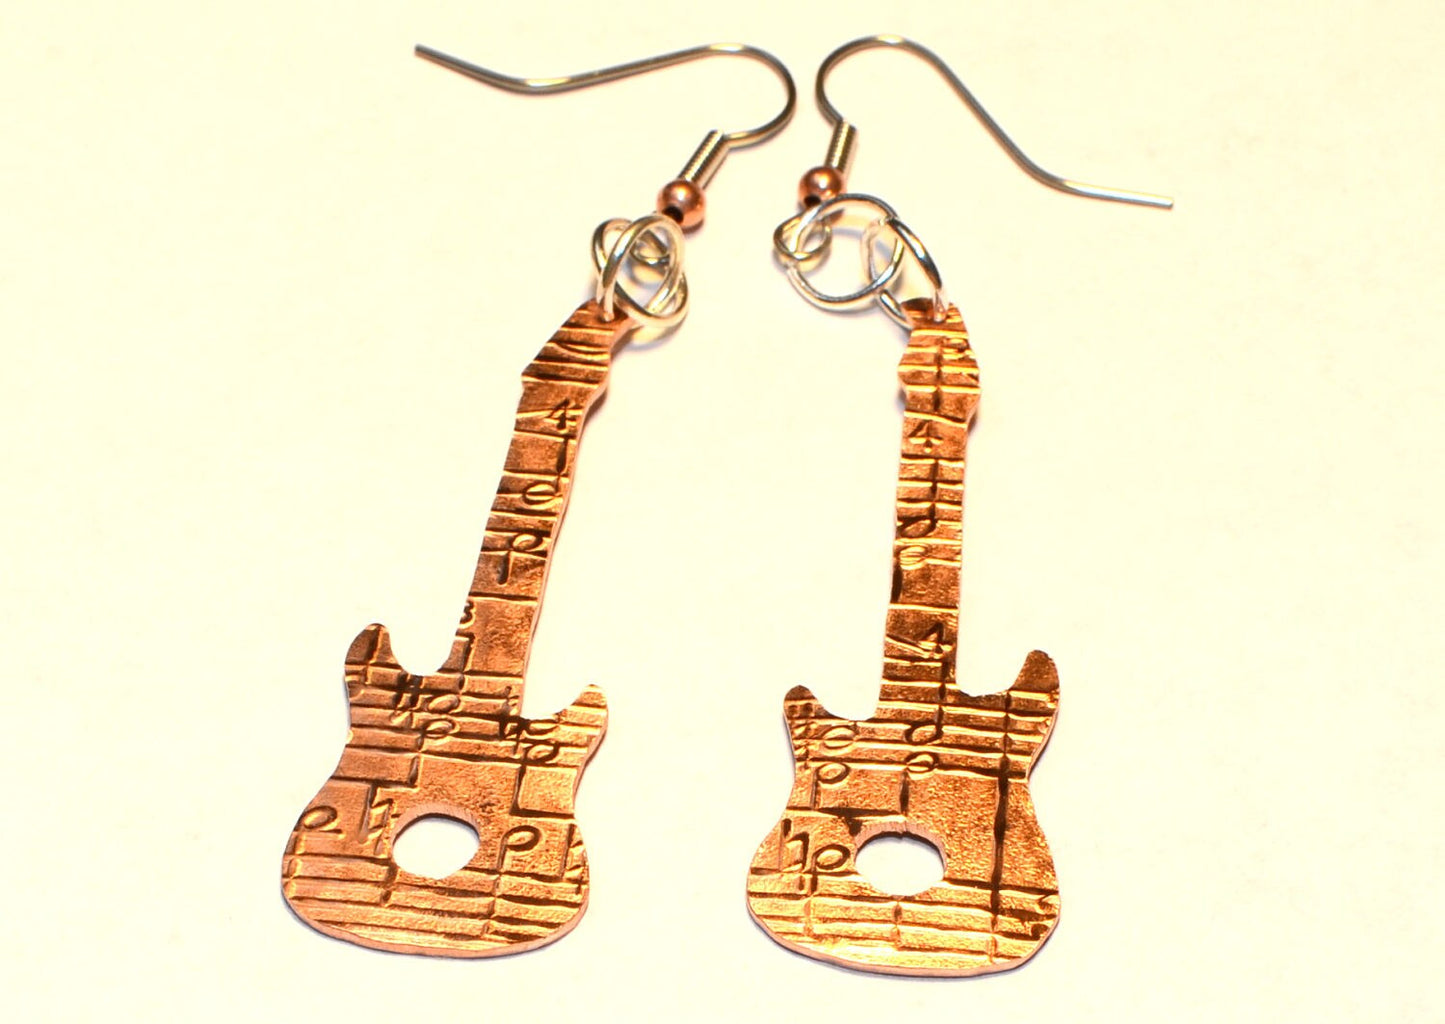 Copper guitar shaped earrings with music notes